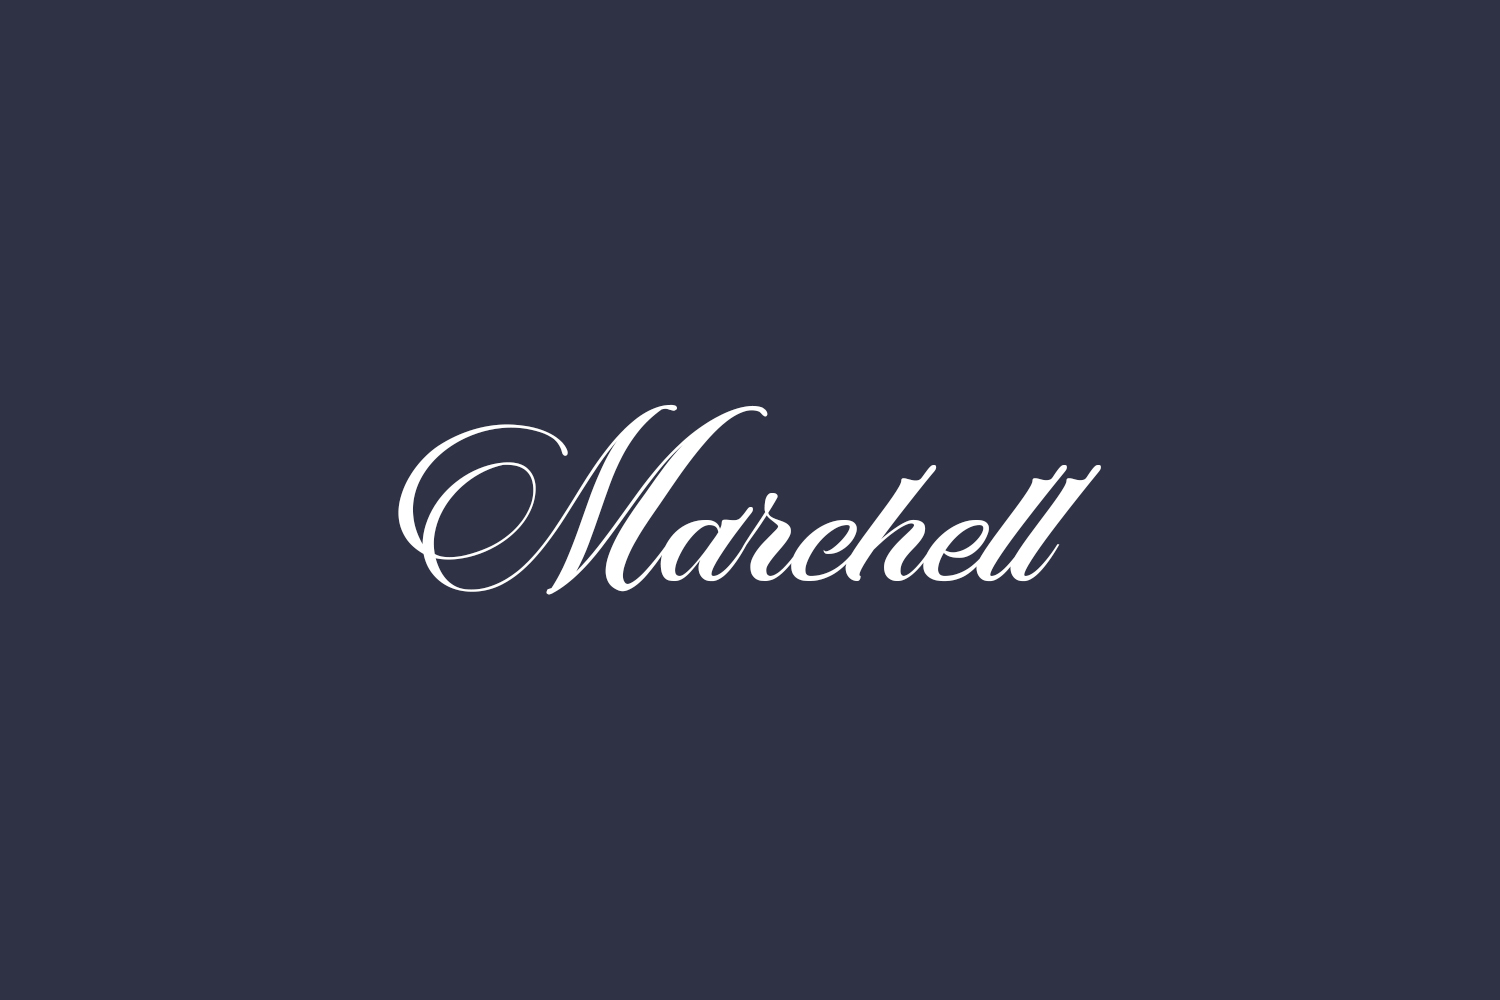 Marchell Free Font